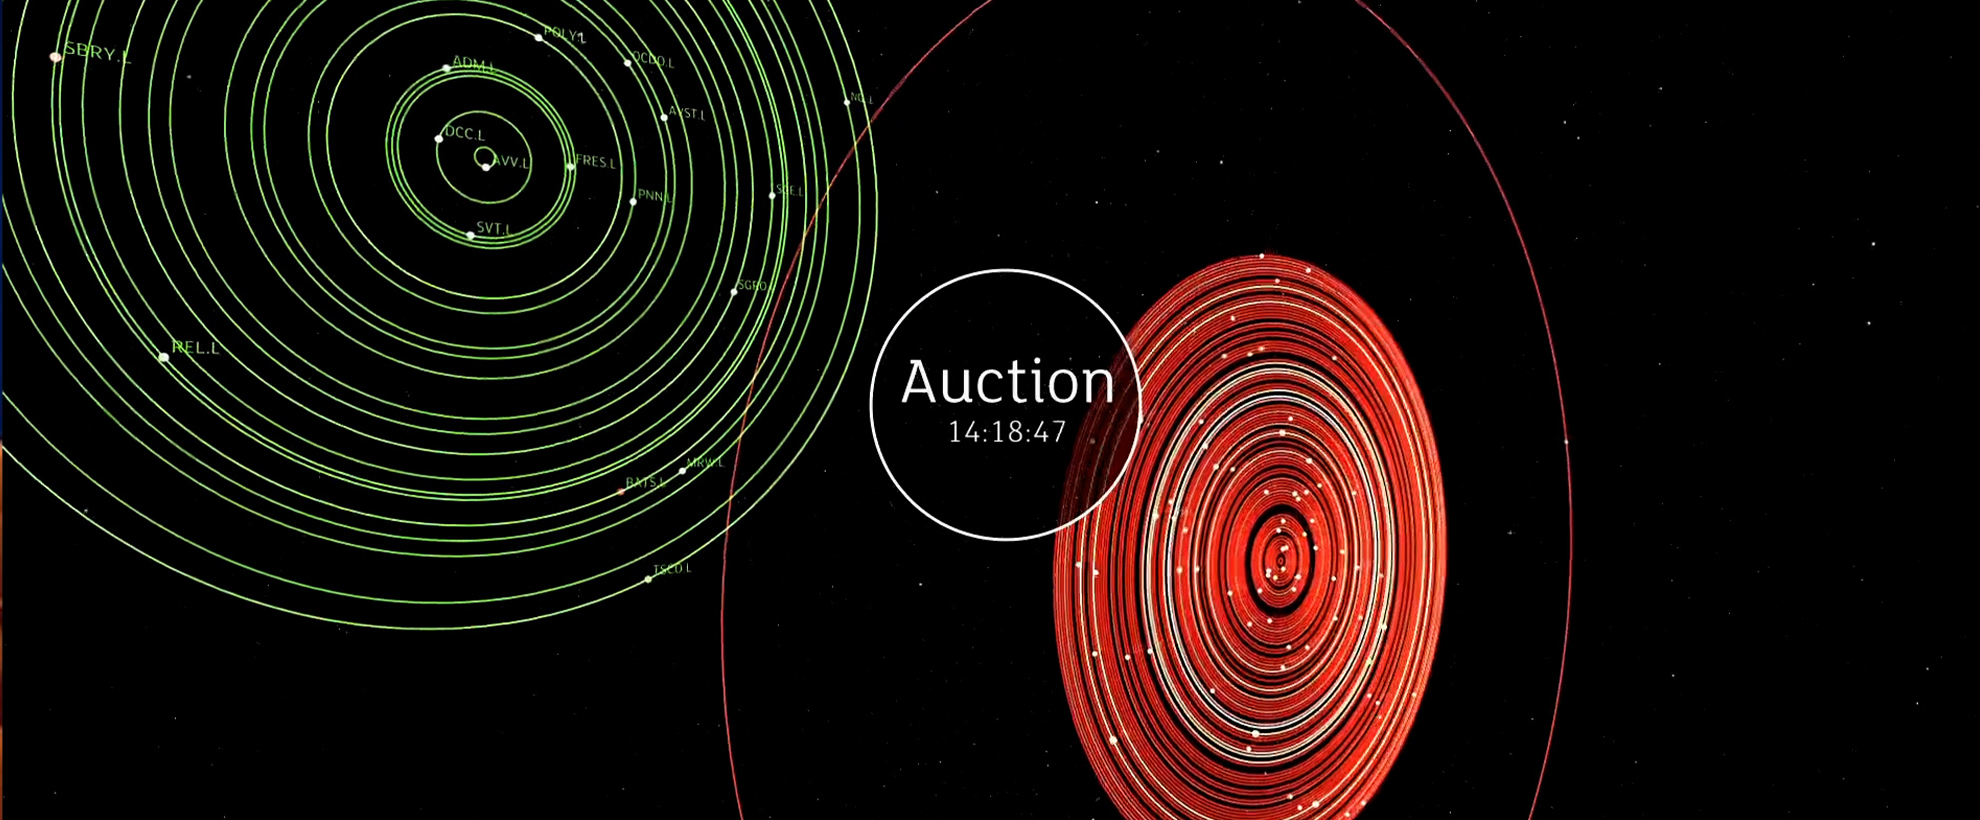 Black background. Green and orange planet-like rings. The word 'auction' written with a circle around it and the numbers 14:18:47 underneath it